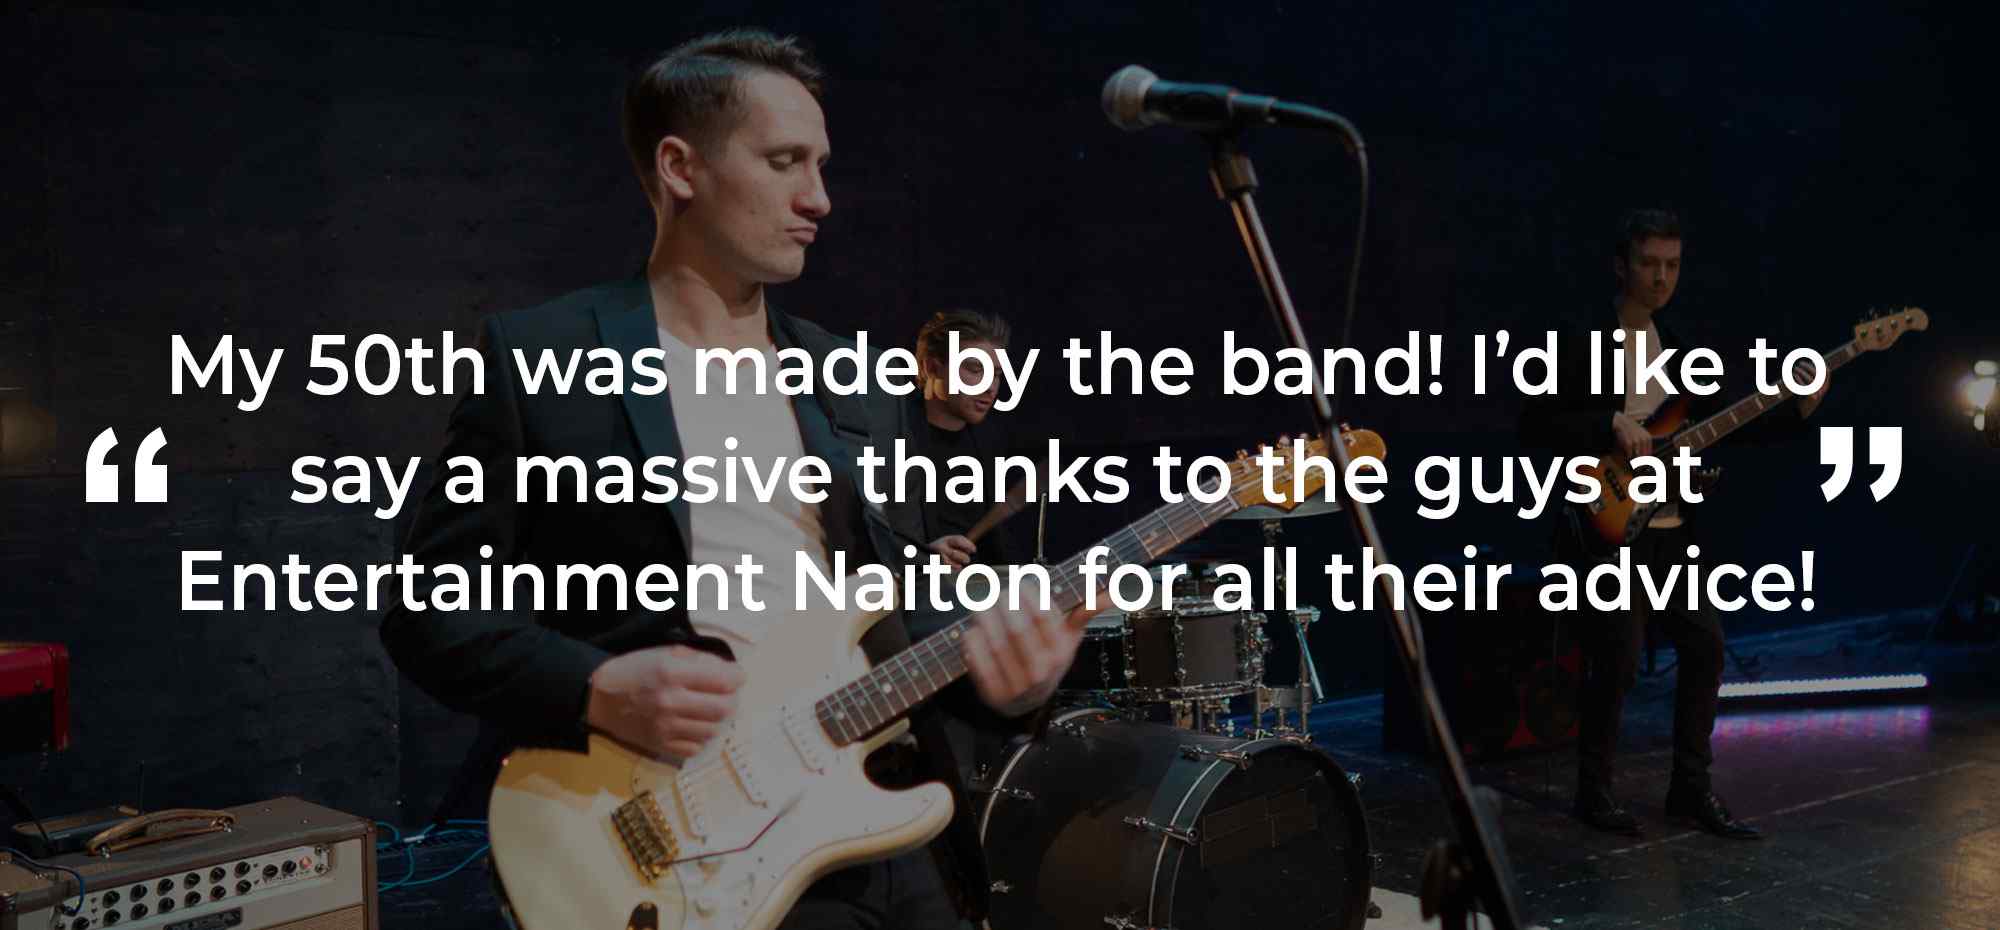 Client Review of a Party Band Lancashire